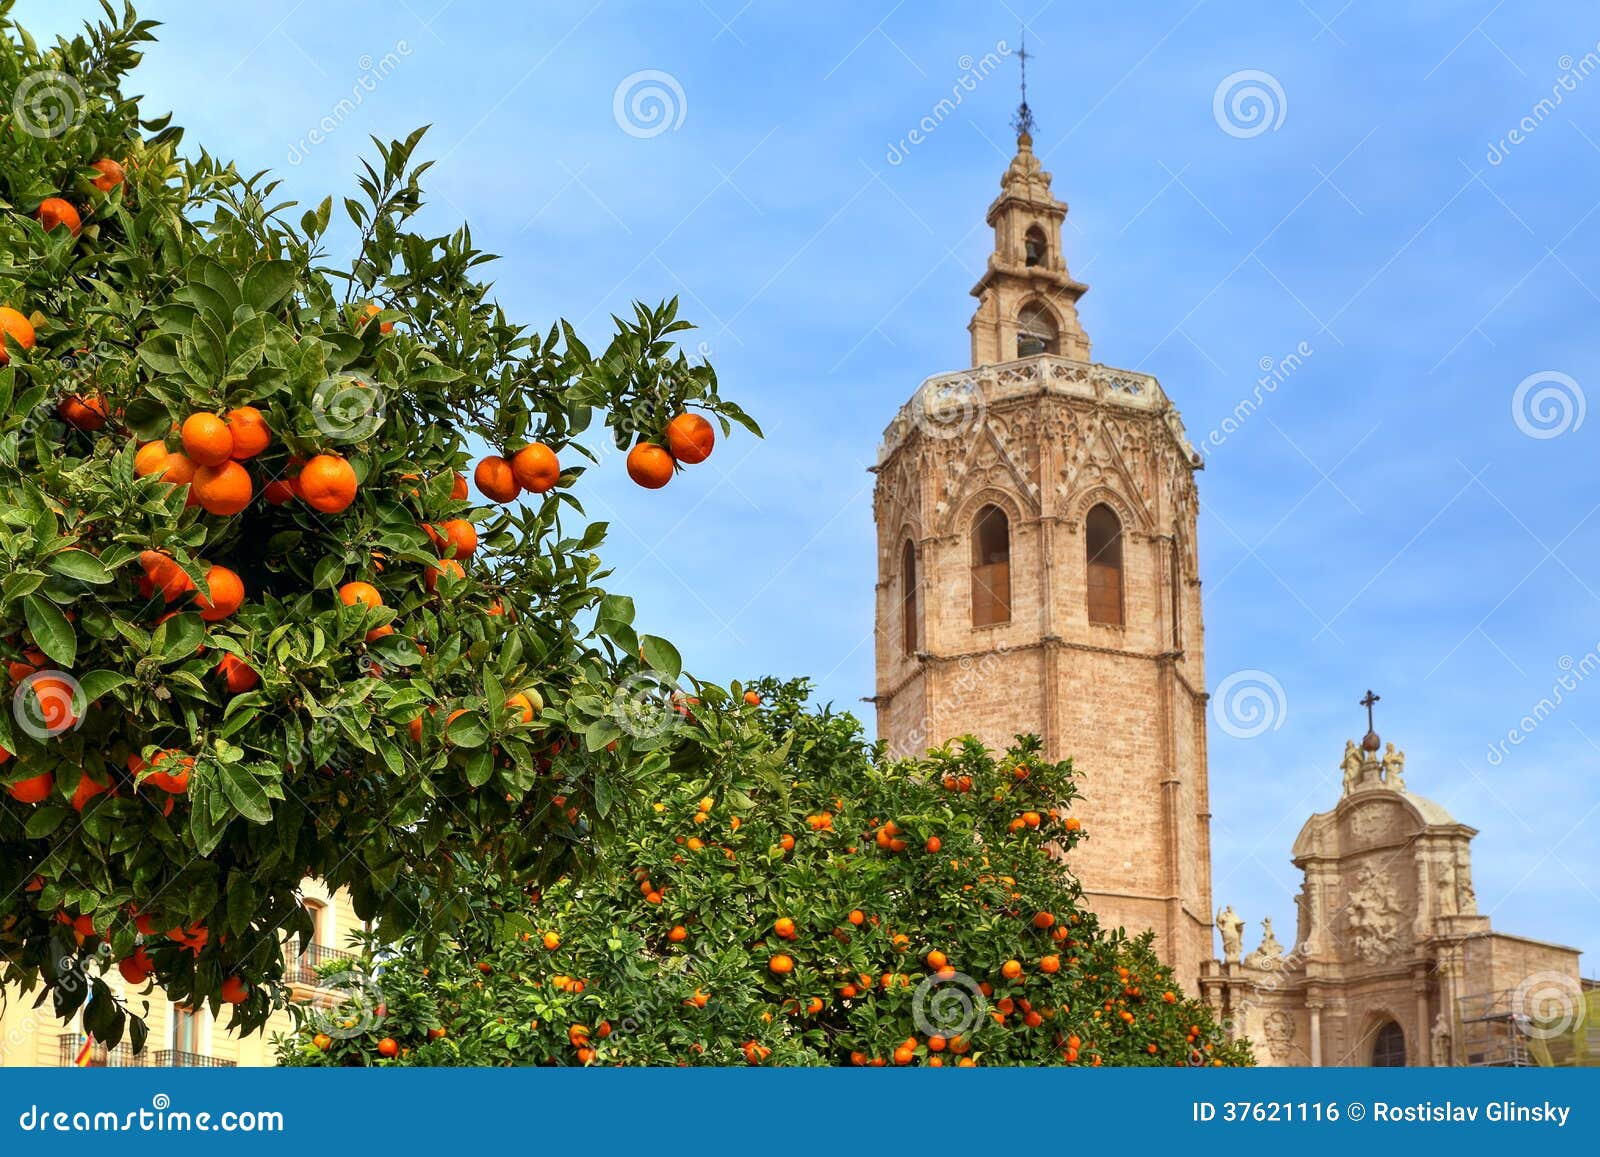 orange tree and valencia cathedral.